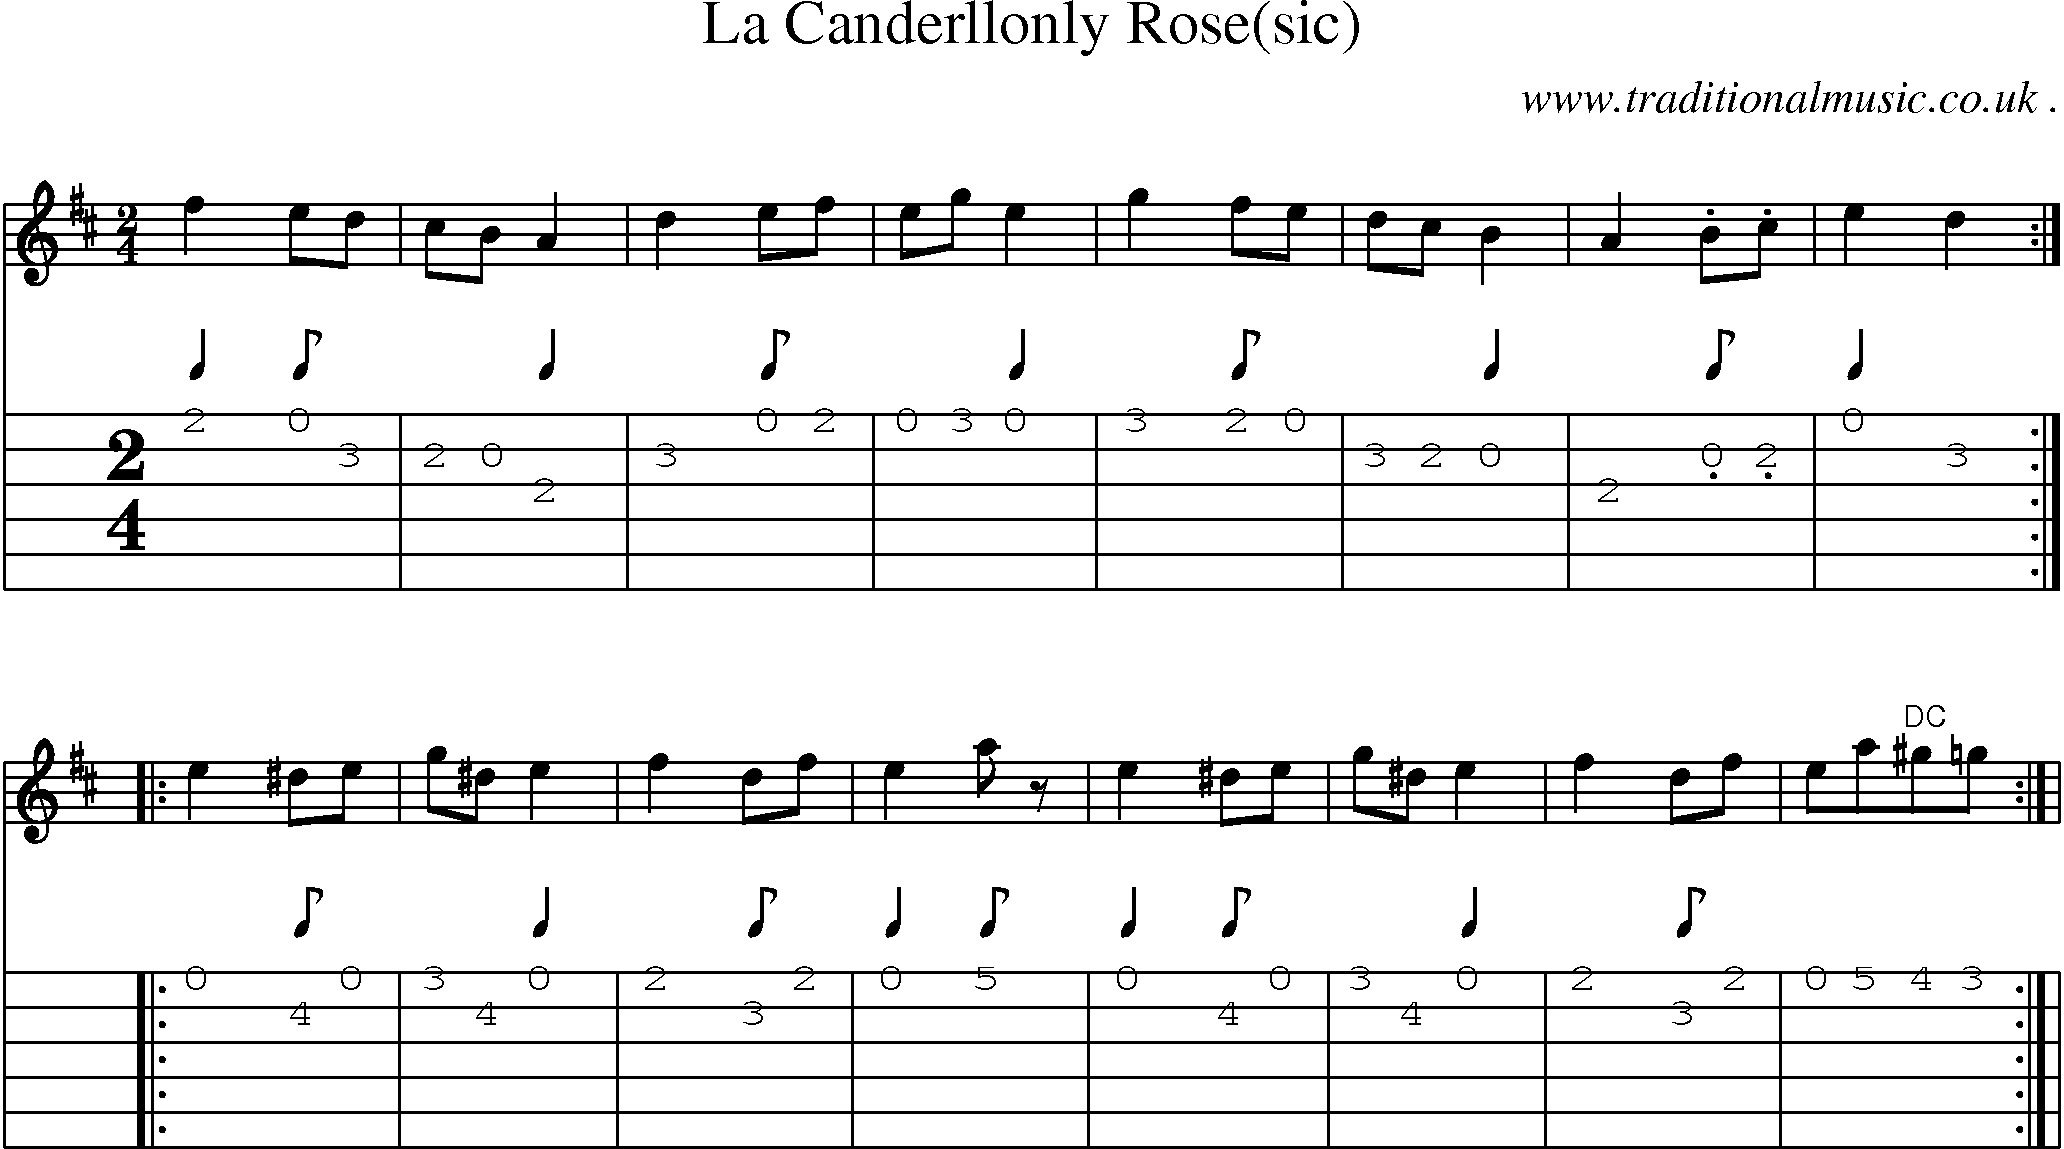 Sheet-Music and Guitar Tabs for La Canderllonly Rose(sic)